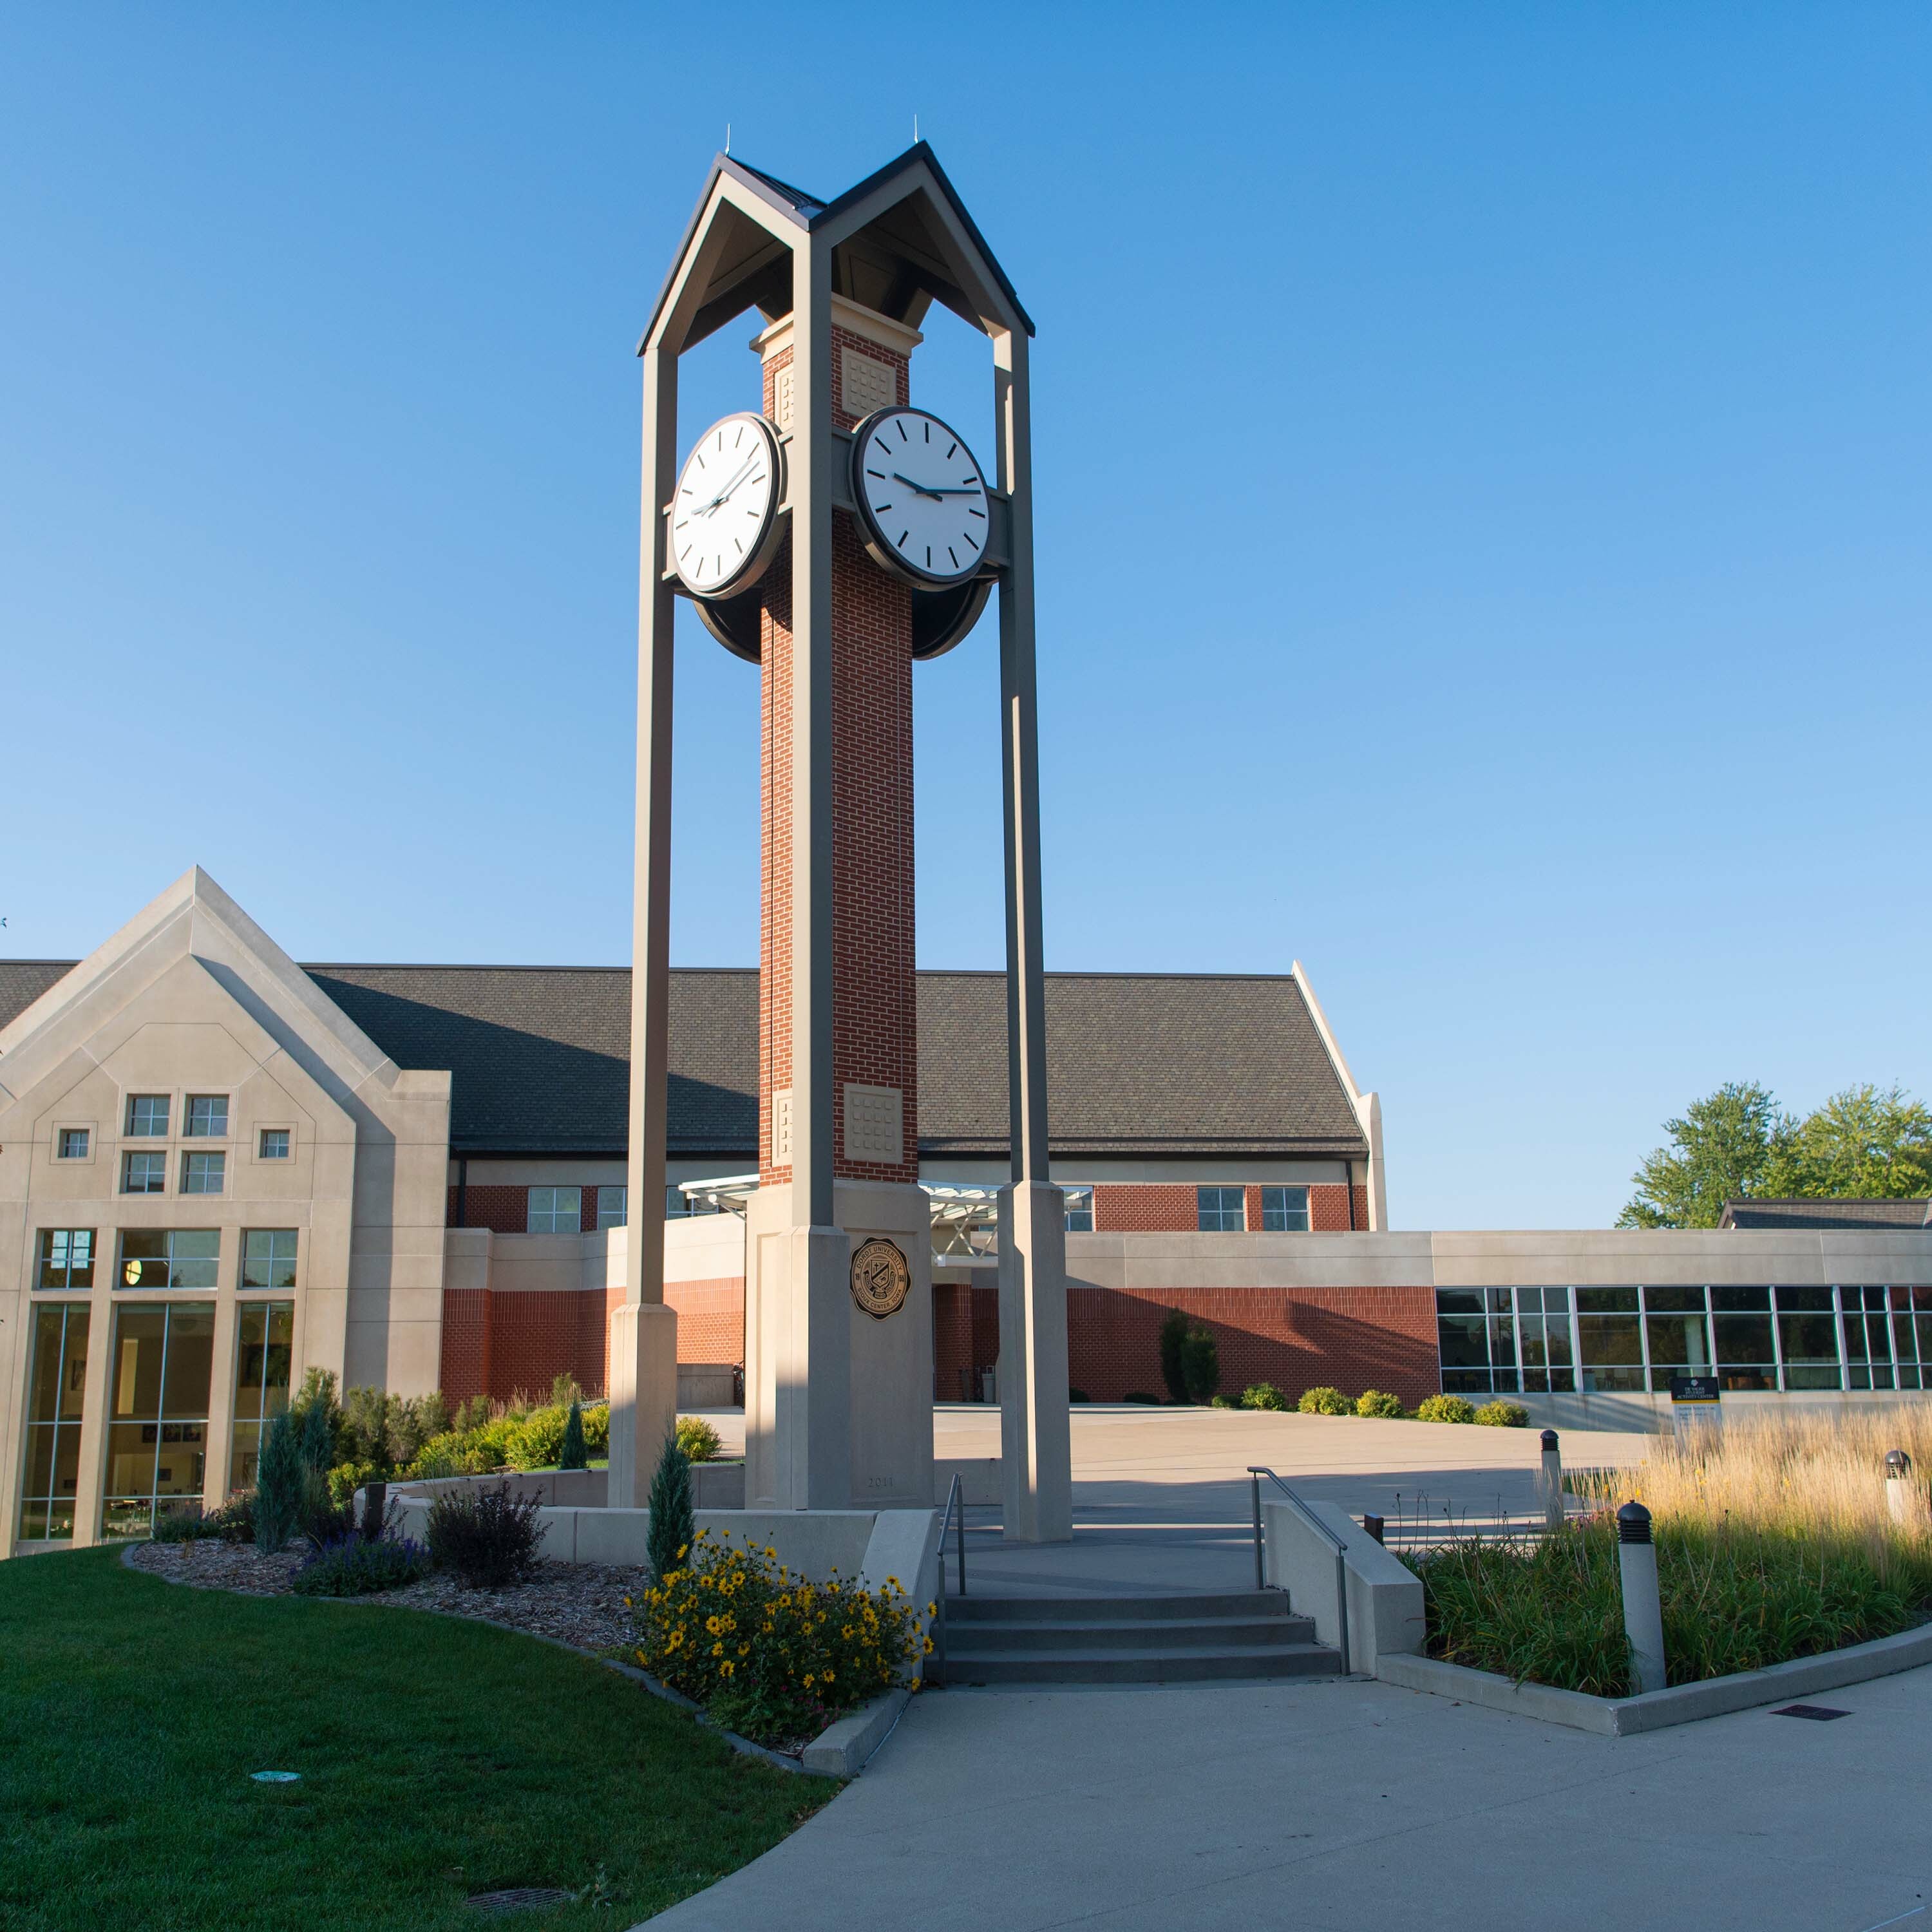 A view of the Clock Tower with the Campus Center behind it